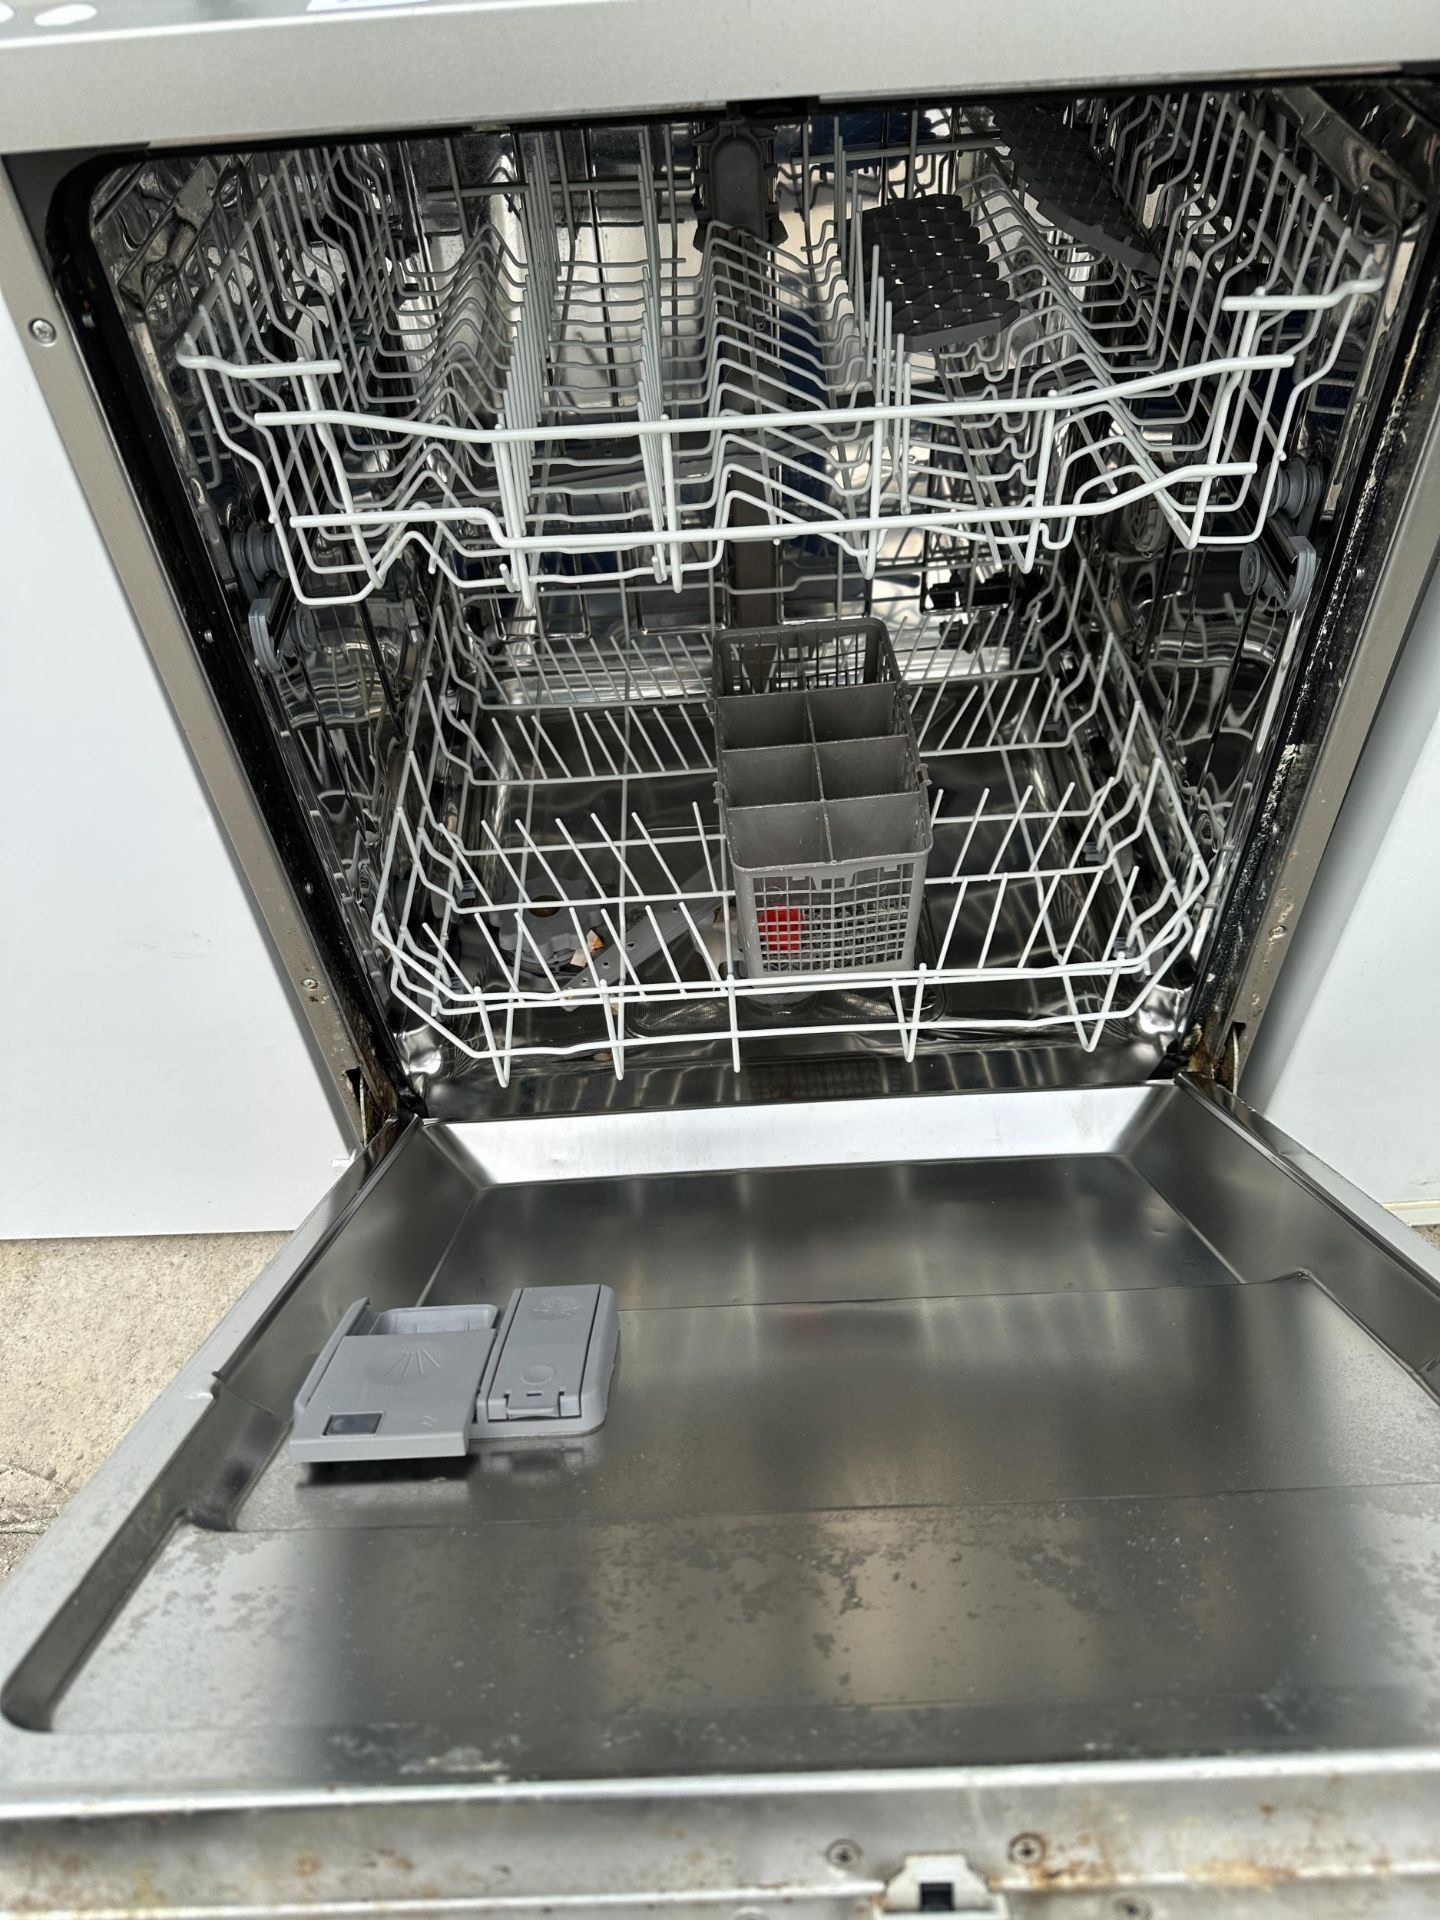 A SILVER ELECTRA DISH WASHER - Image 2 of 2